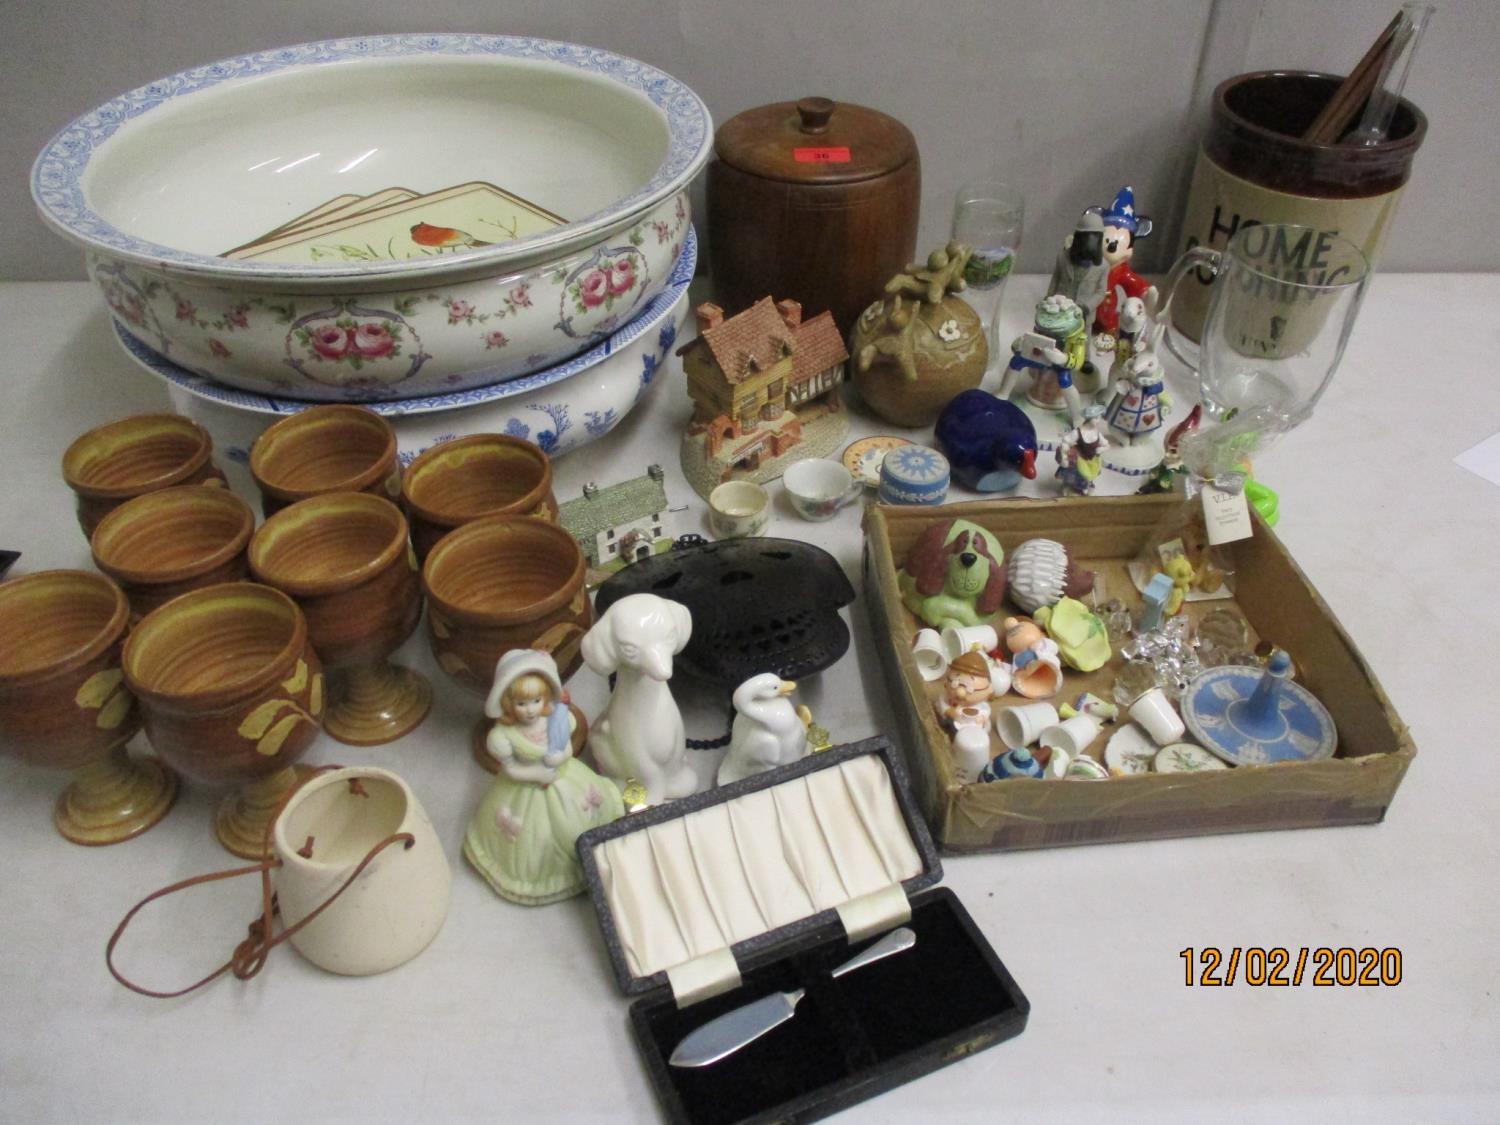 Two early 20th century washbowls, mixed household items to include ornaments, pottery wine